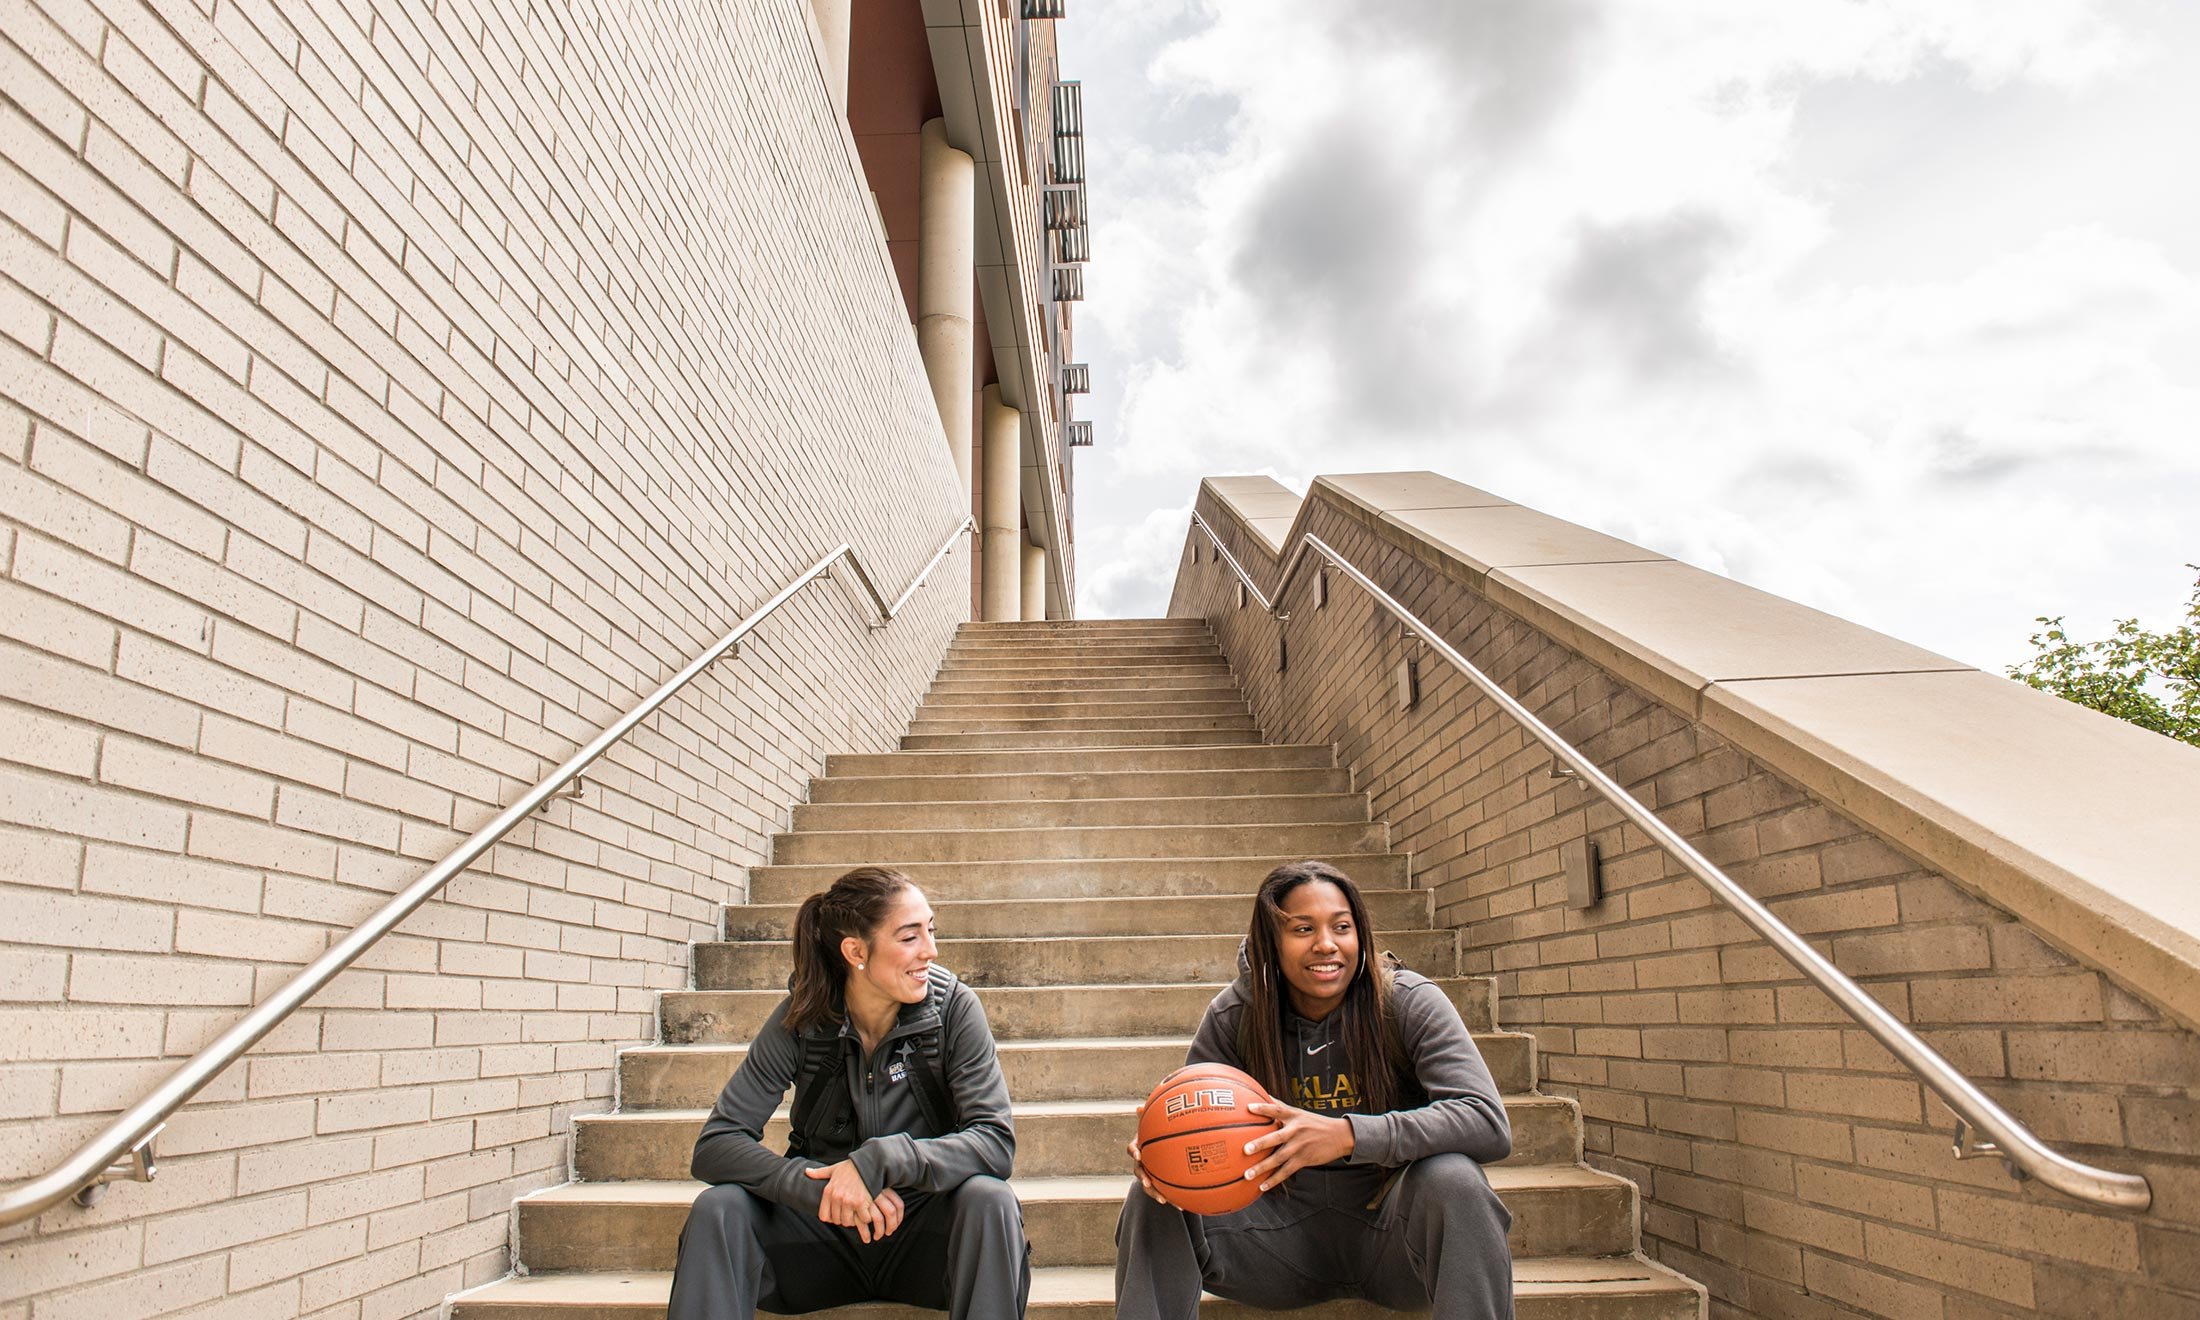 Oakland University women's basketball player Taylor Gleason sits on the steps of the Human Health building and talks with a friend holding a basketball 